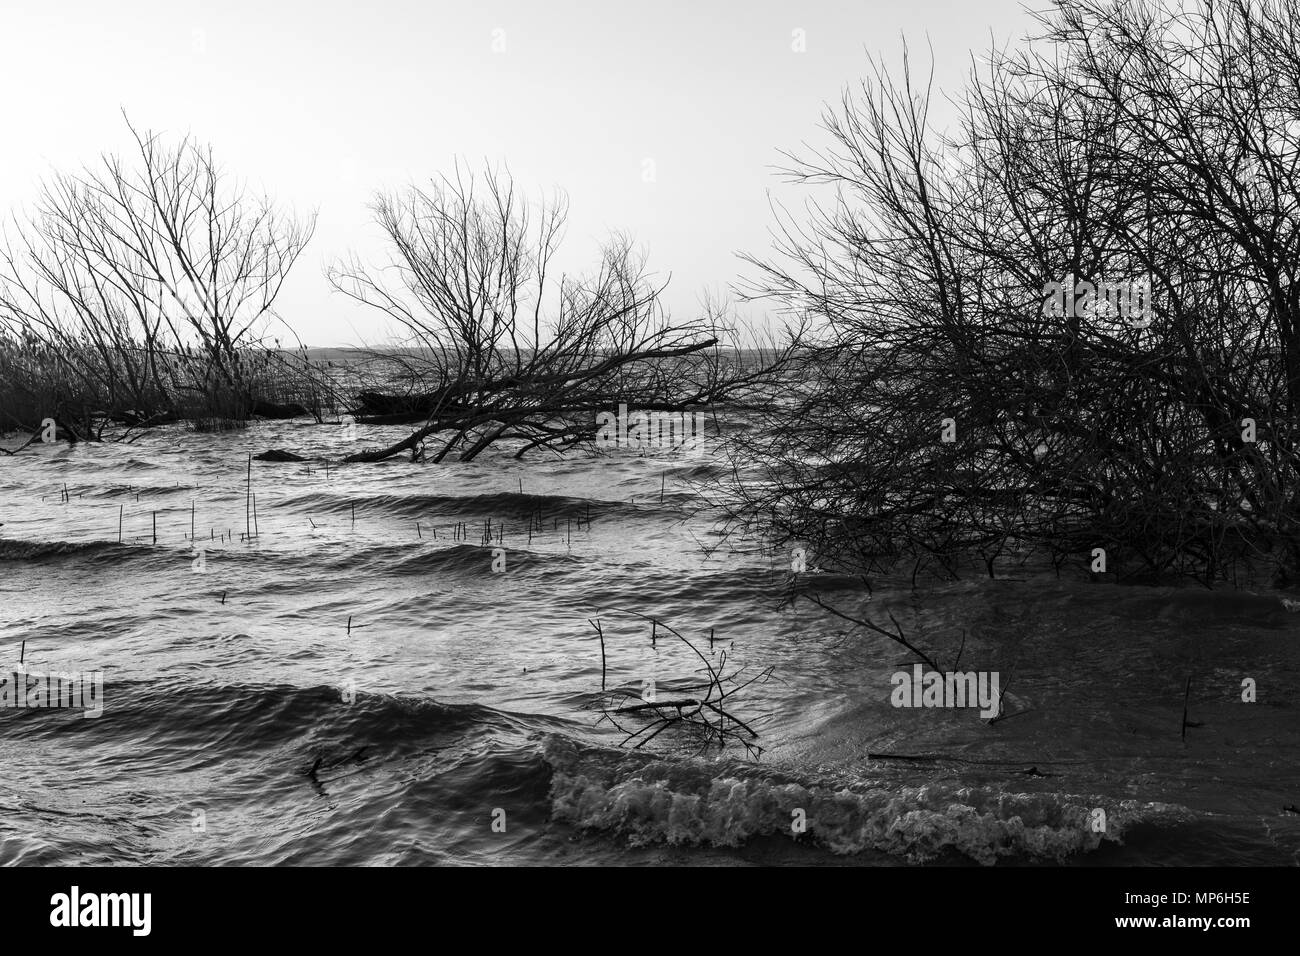 View of a lake on a windy day, with skeletal trees and water wav Stock Photo